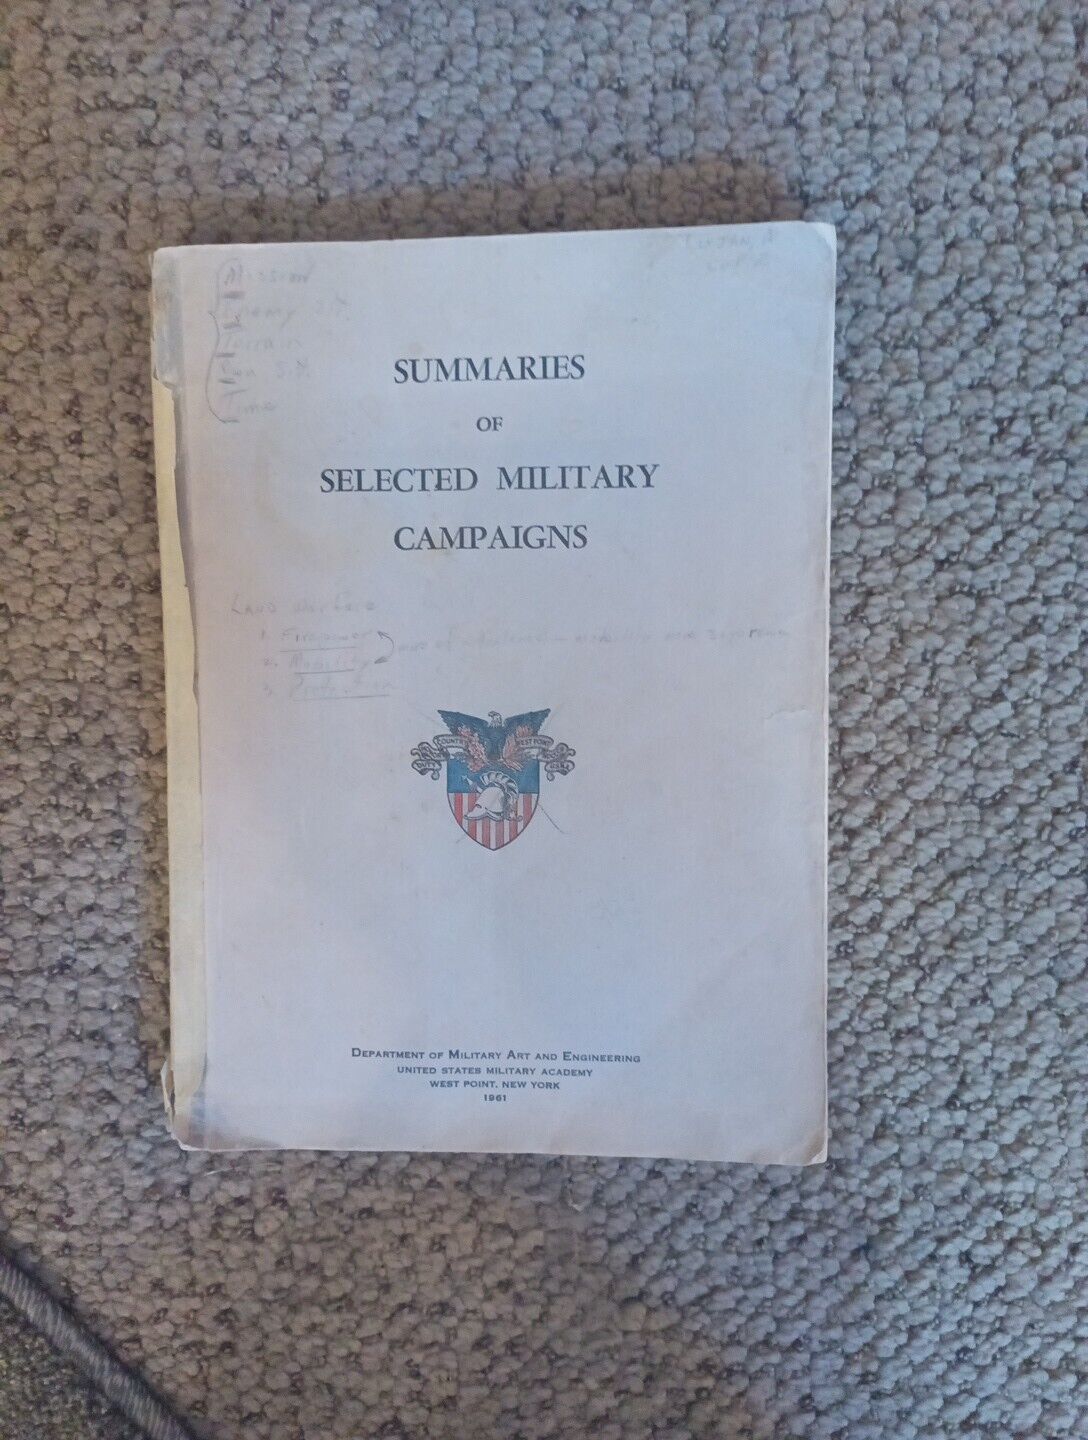 Summaries of Selected Military Campaigns 1961 West Point